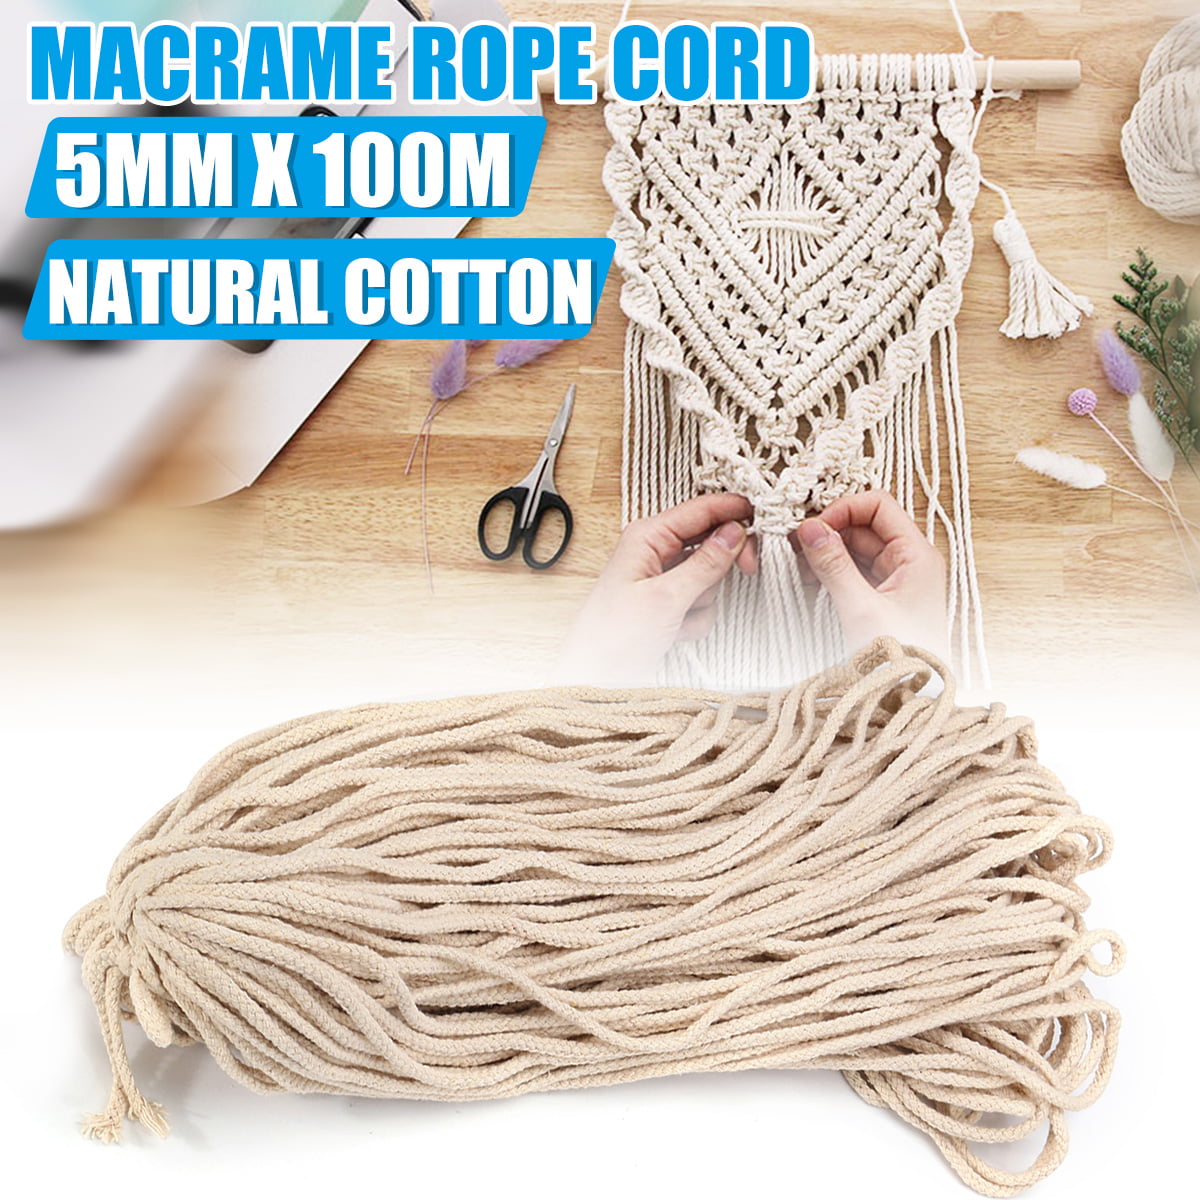 Natural Cotton Cord Rope DIY Macrame Cord Colored Cotton Rope Wall Hanging Plant Hanger Craft Making Knitting Rope Home Decoration 13 Colors 3mm200m/4mm110m 3mm, Lake Blue 